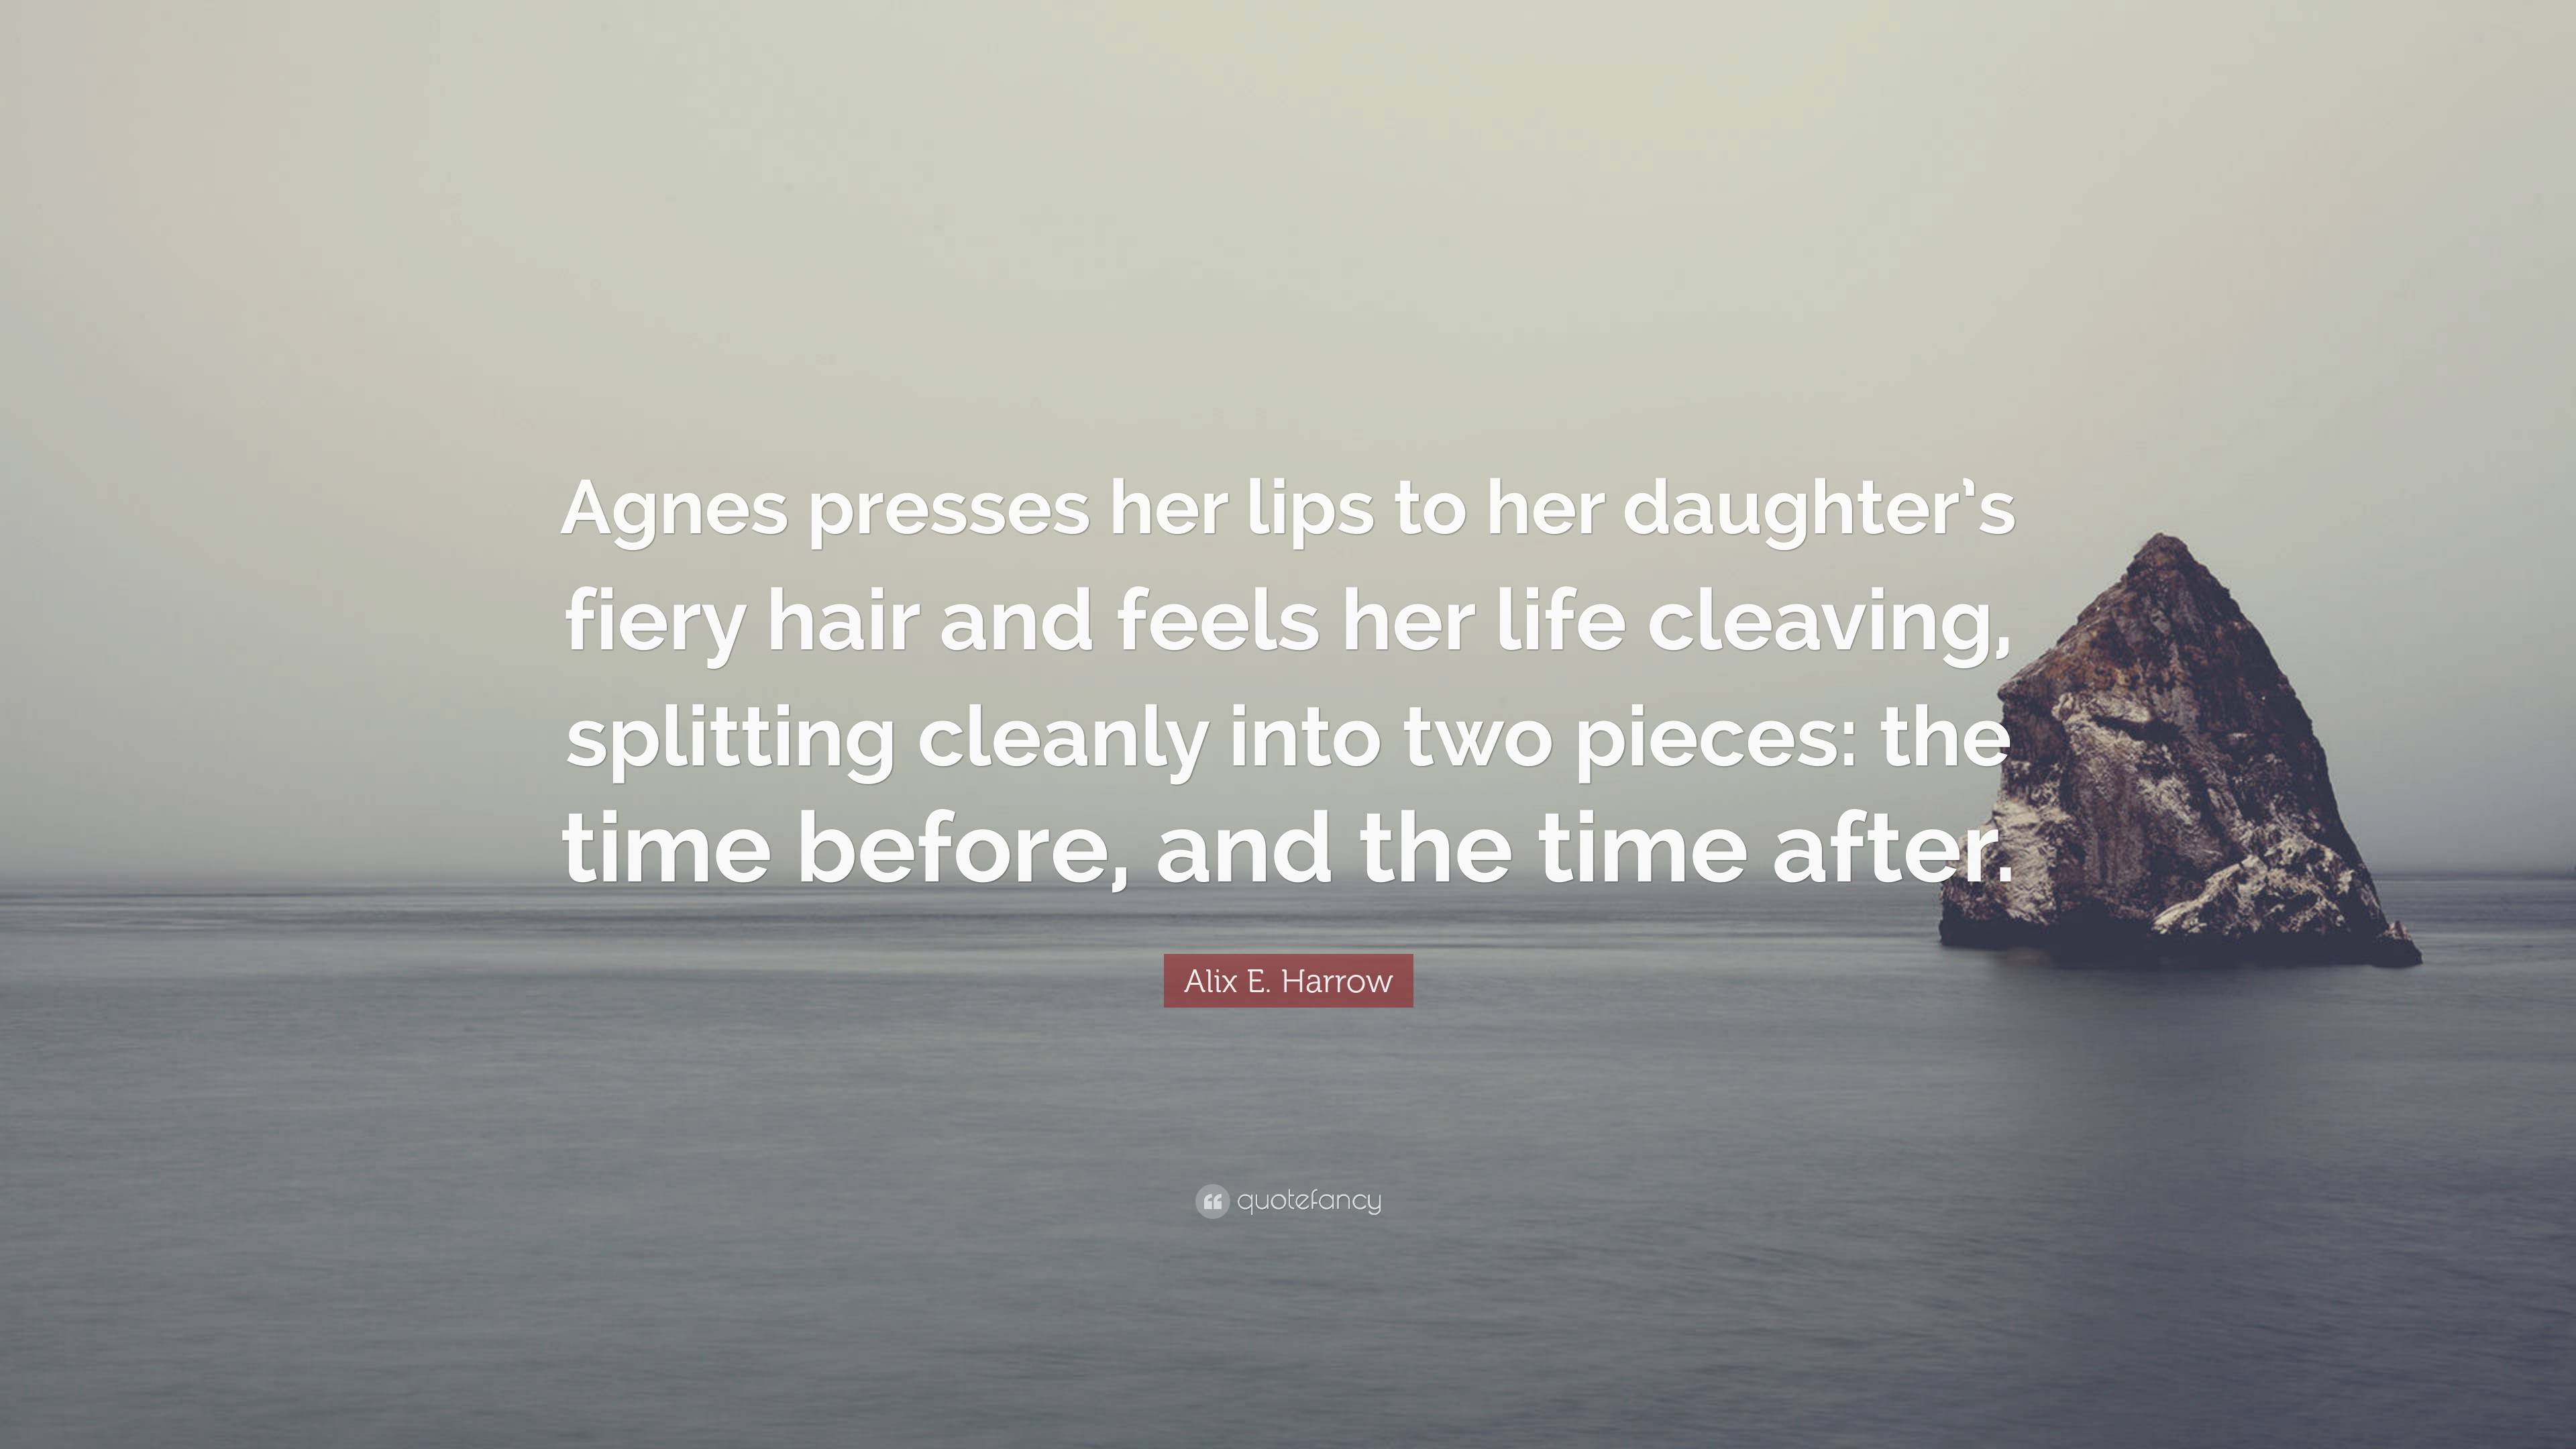 Alix E. Harrow Quote: “Agnes presses her lips to her daughter’s fiery ...